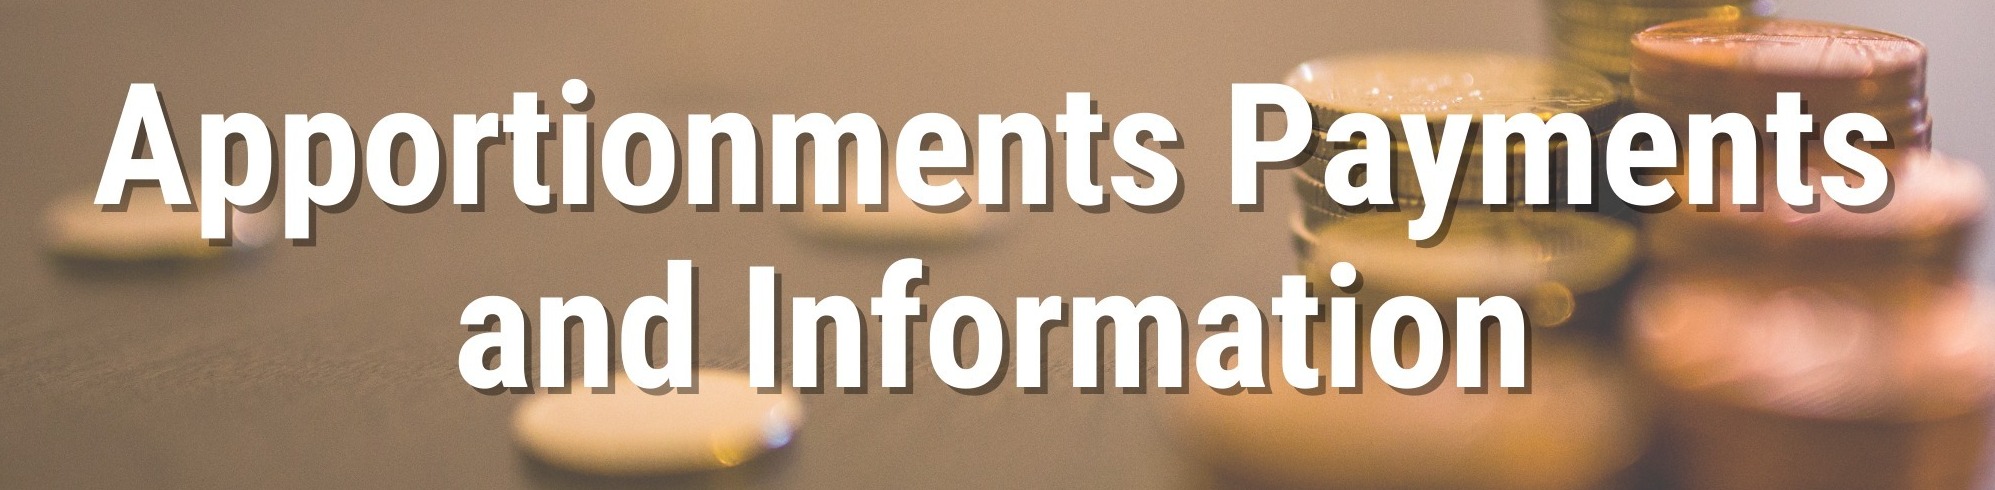 Apportionment Payment Banner